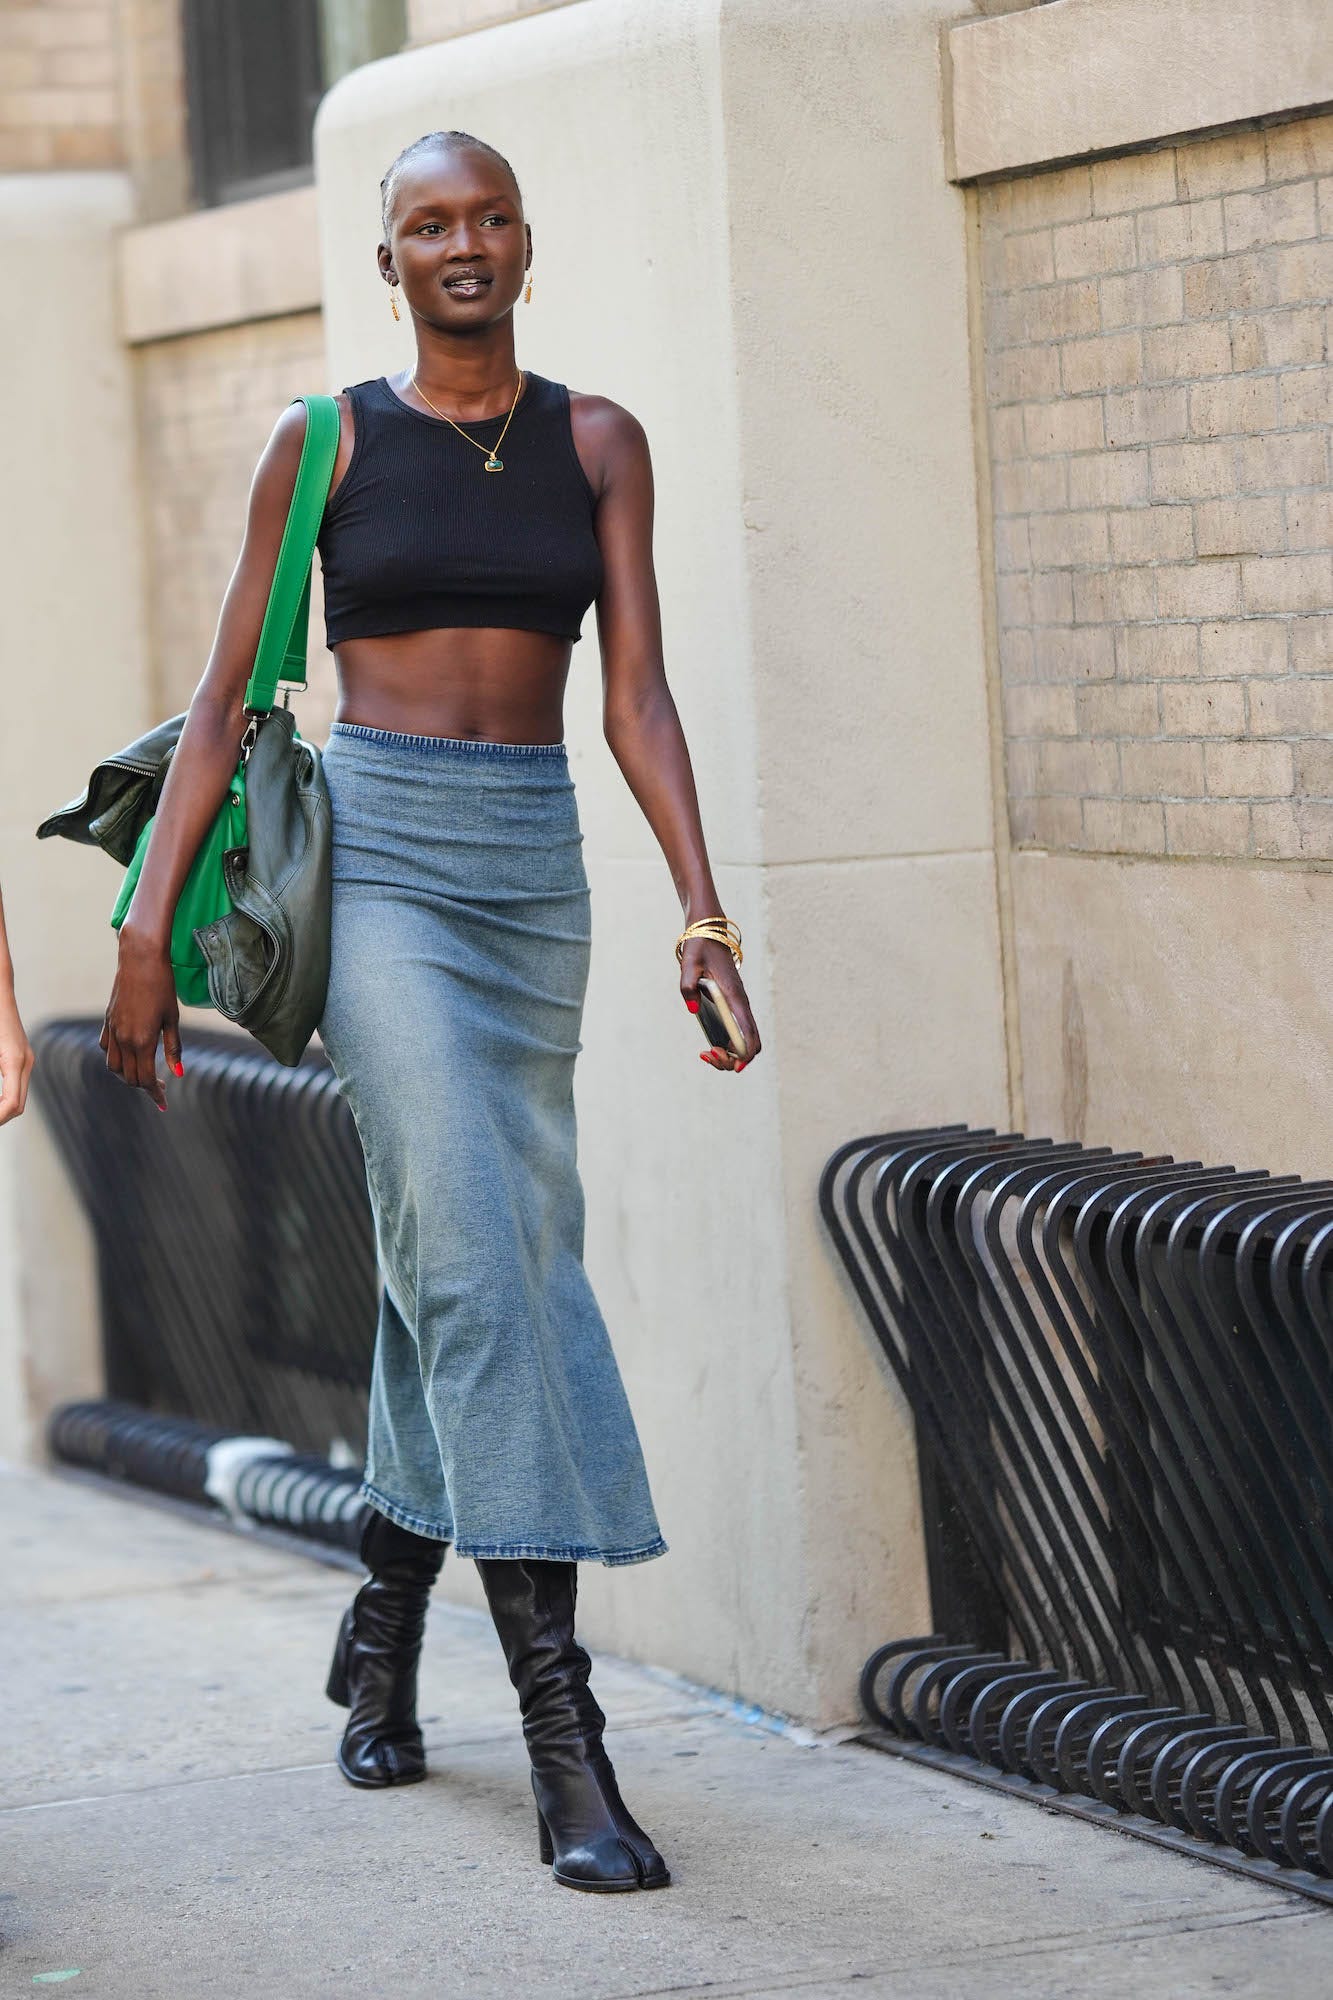 8 ways Gen Zs use fashion to express themselves